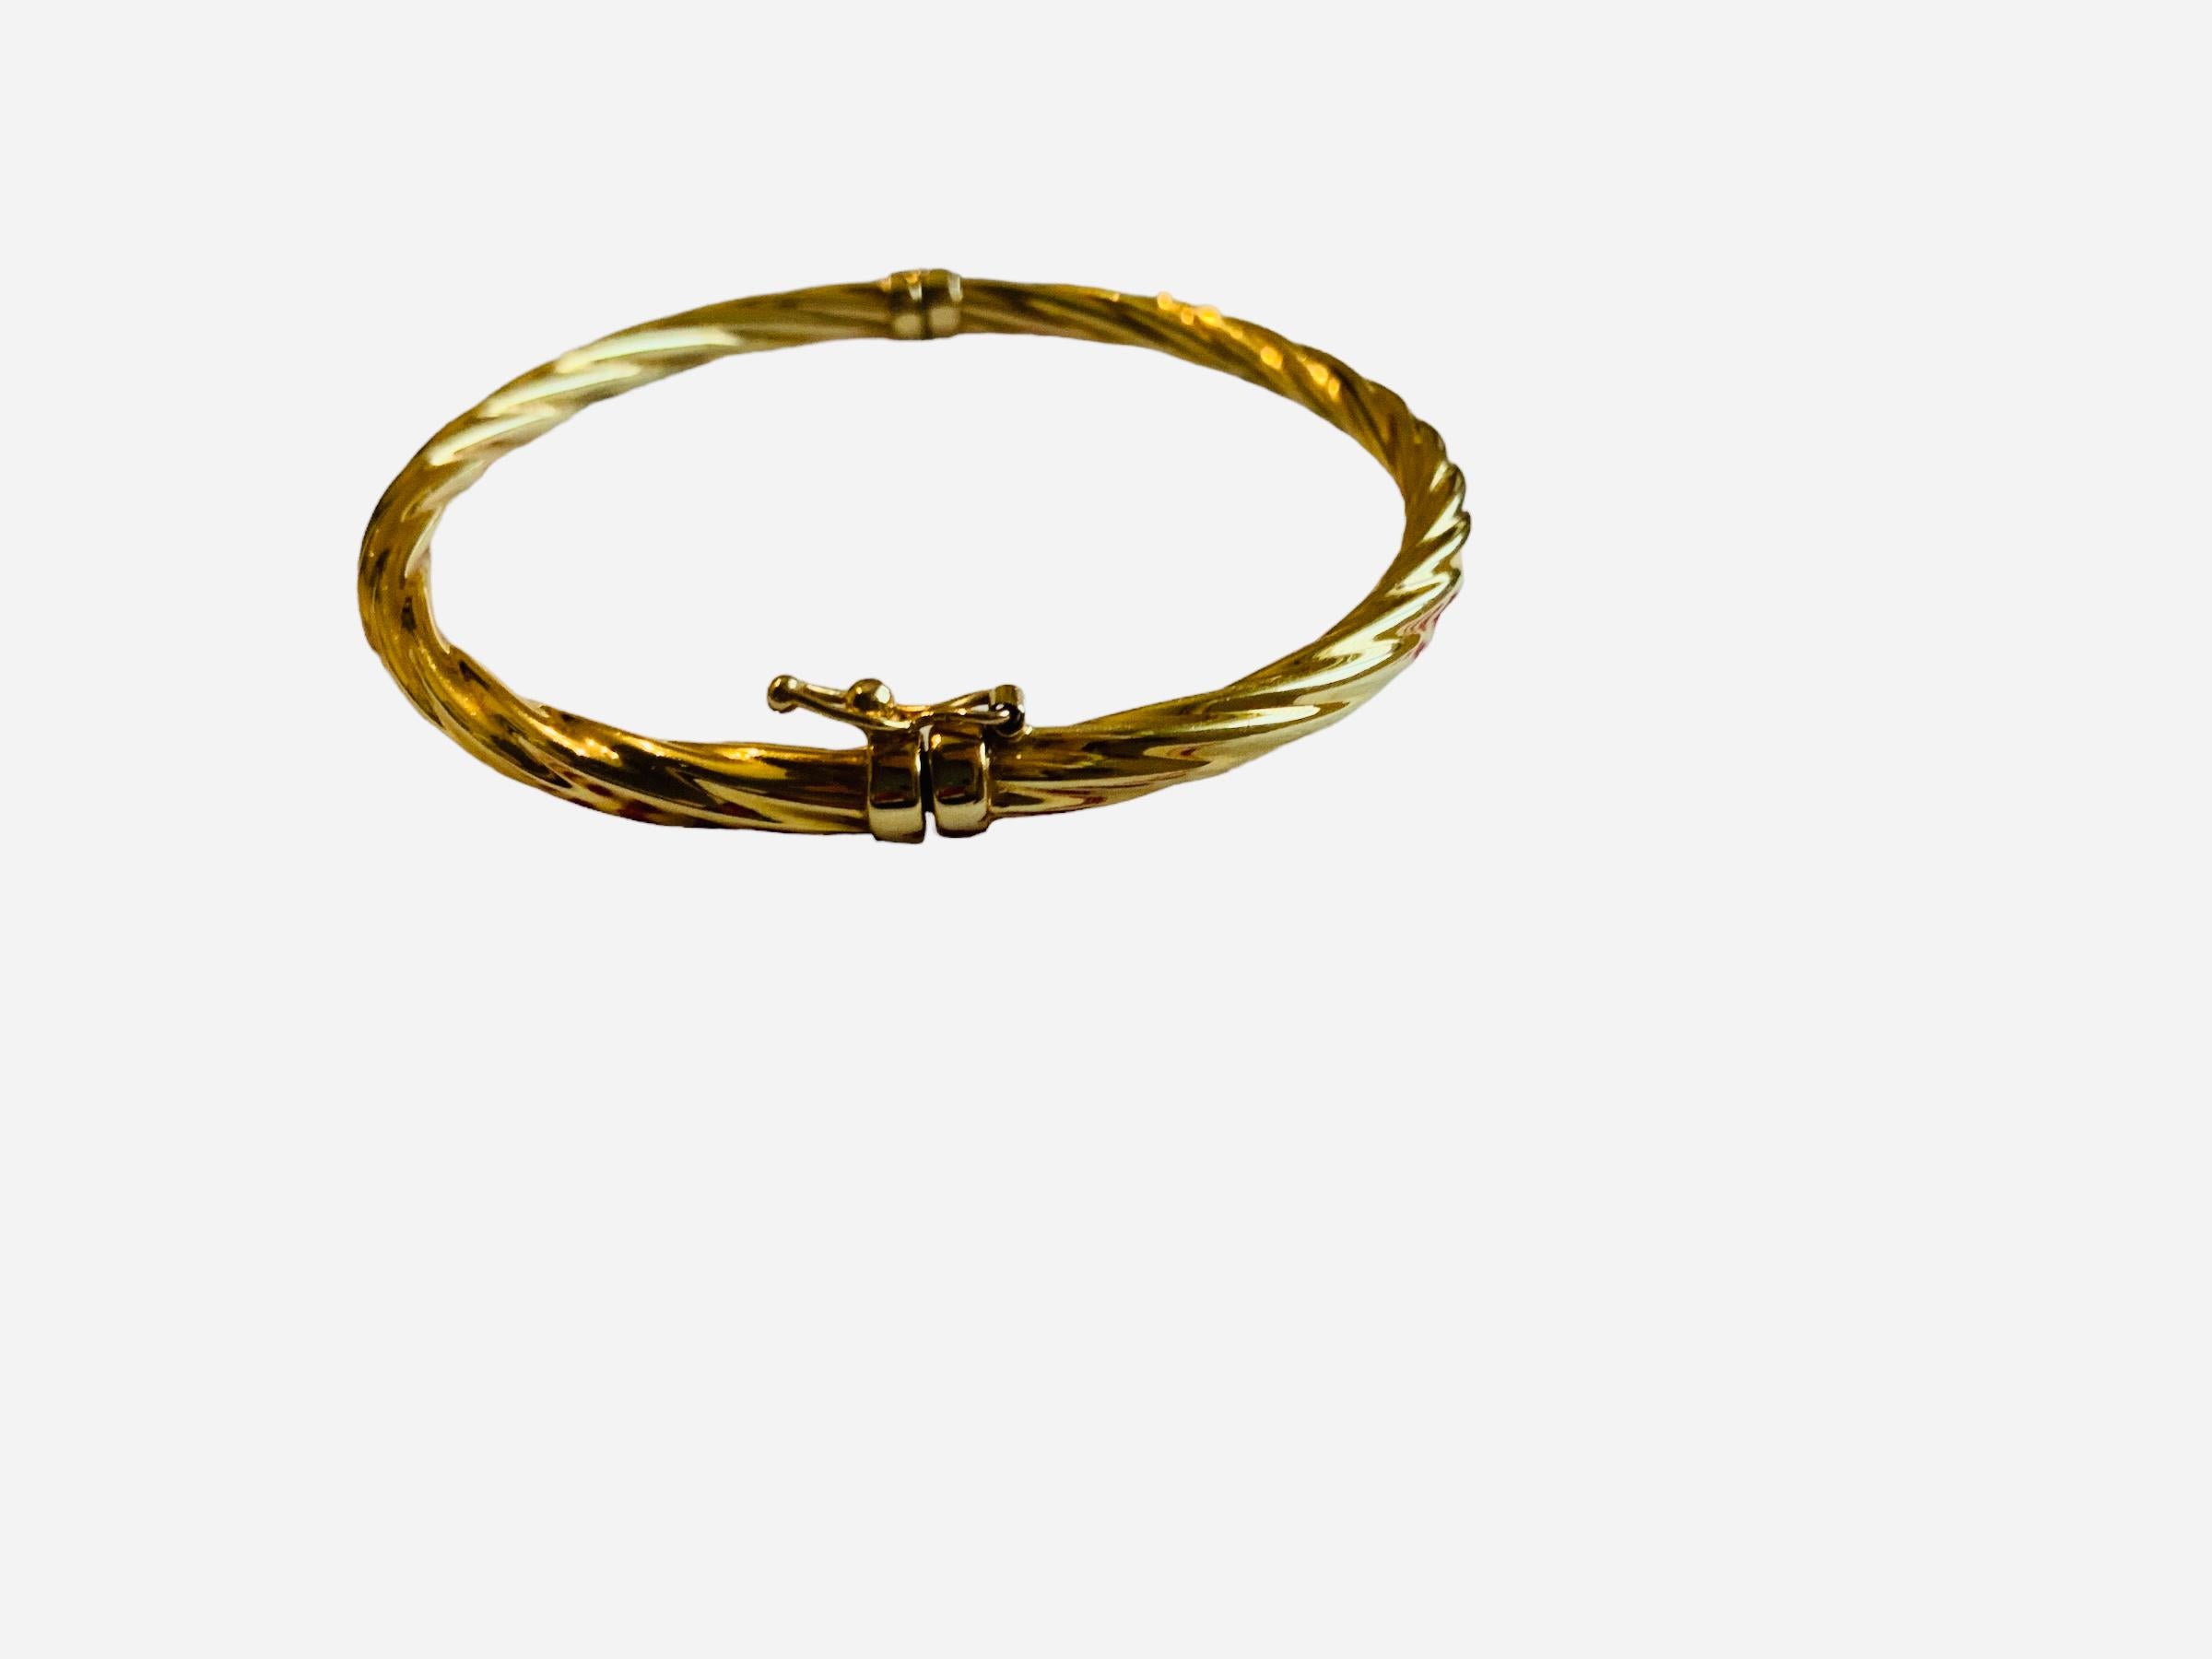 This is an Italian 14K yellow gold bangle. It depicts a rope, twisted curve or swirl like hinged hollow bangle. It has a round bracelet catch closure with a safety catch. It is hallmarked 14K Italy.